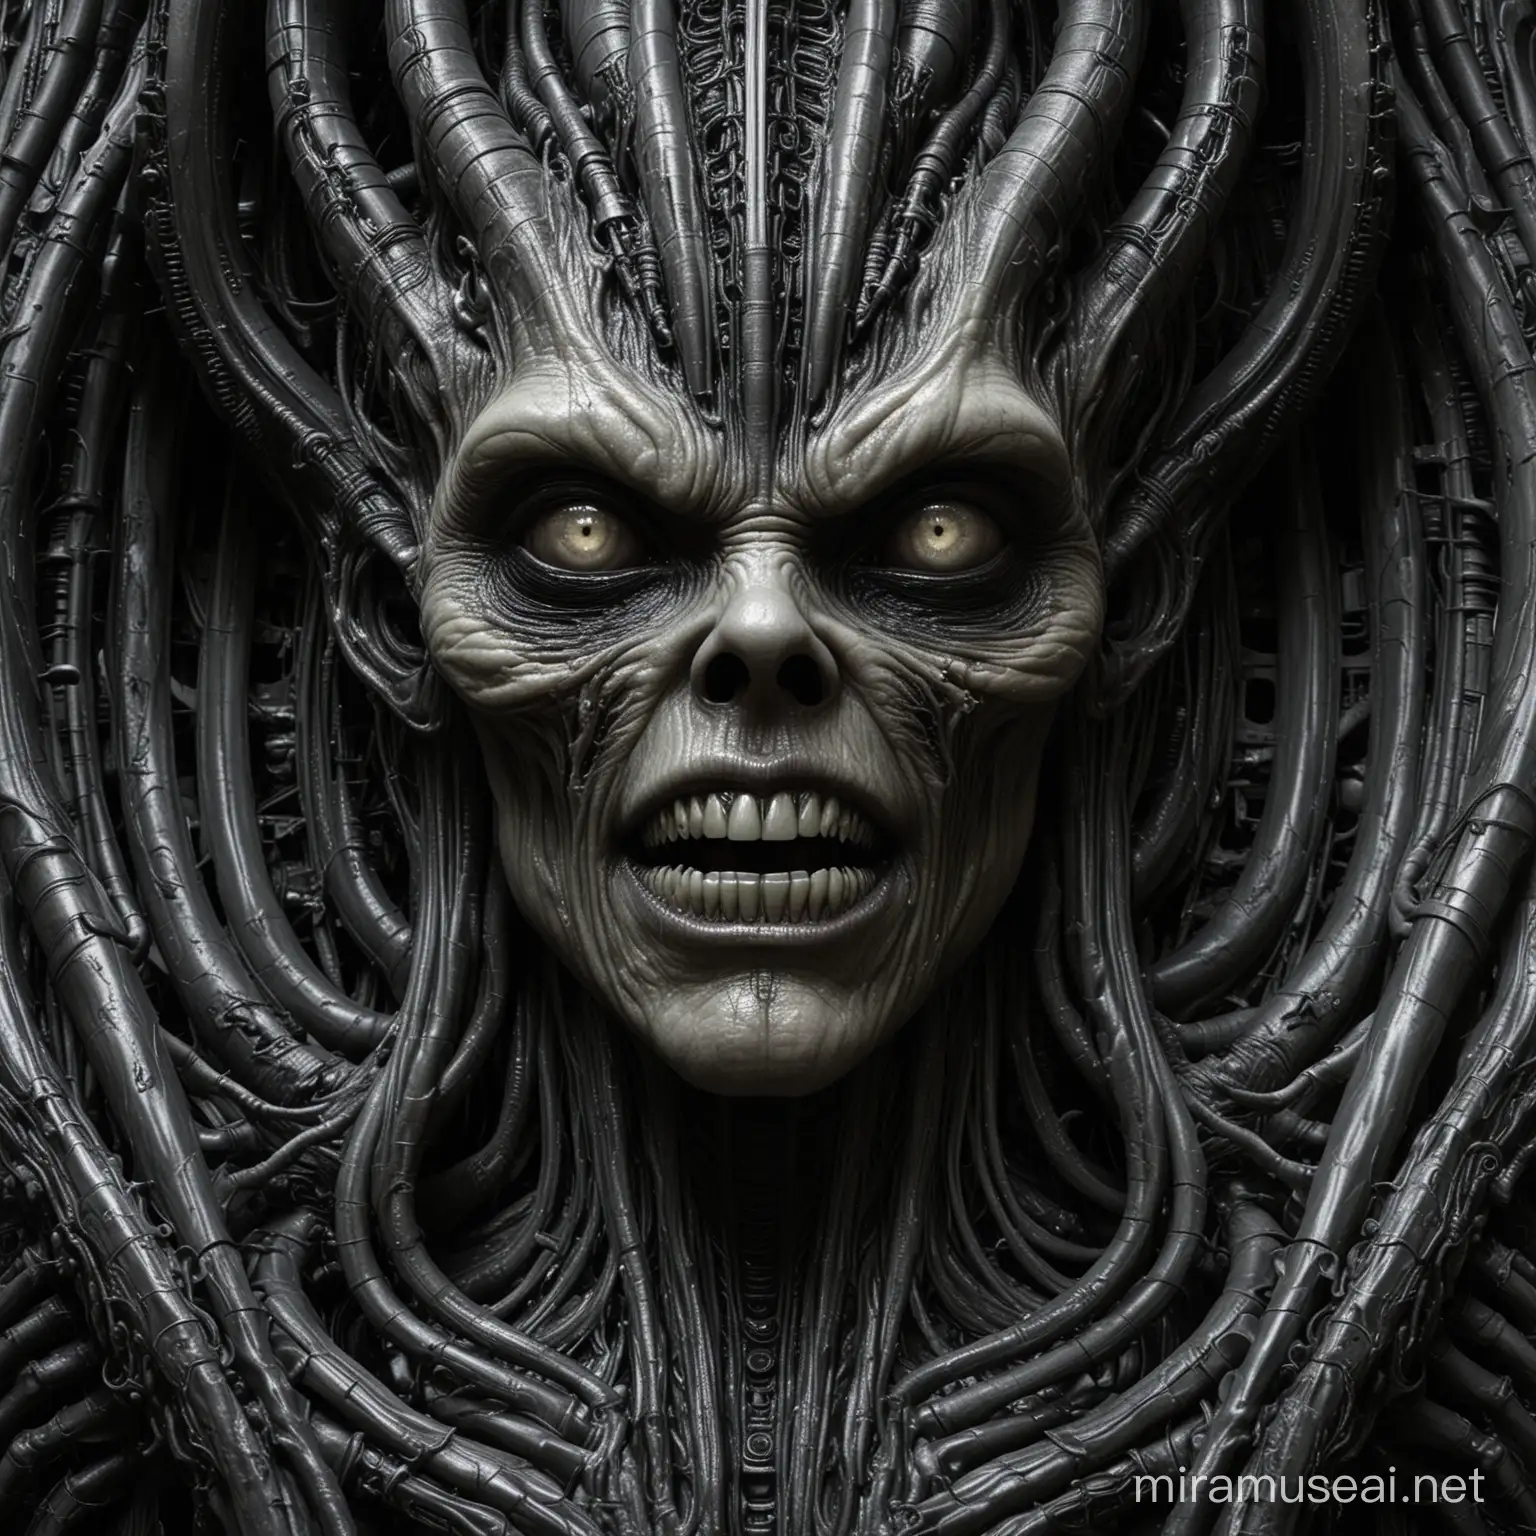 Hyperrealistic, abominable monstrosity::2.2, style of H. R. Giger, biomechanical, dark, detailed flesh and metal fusion, disconcerting, grotesque, unnatural, strange, horrific perspective, extreme closeup, chiaroscuro, stark contrast, harsh lighting 